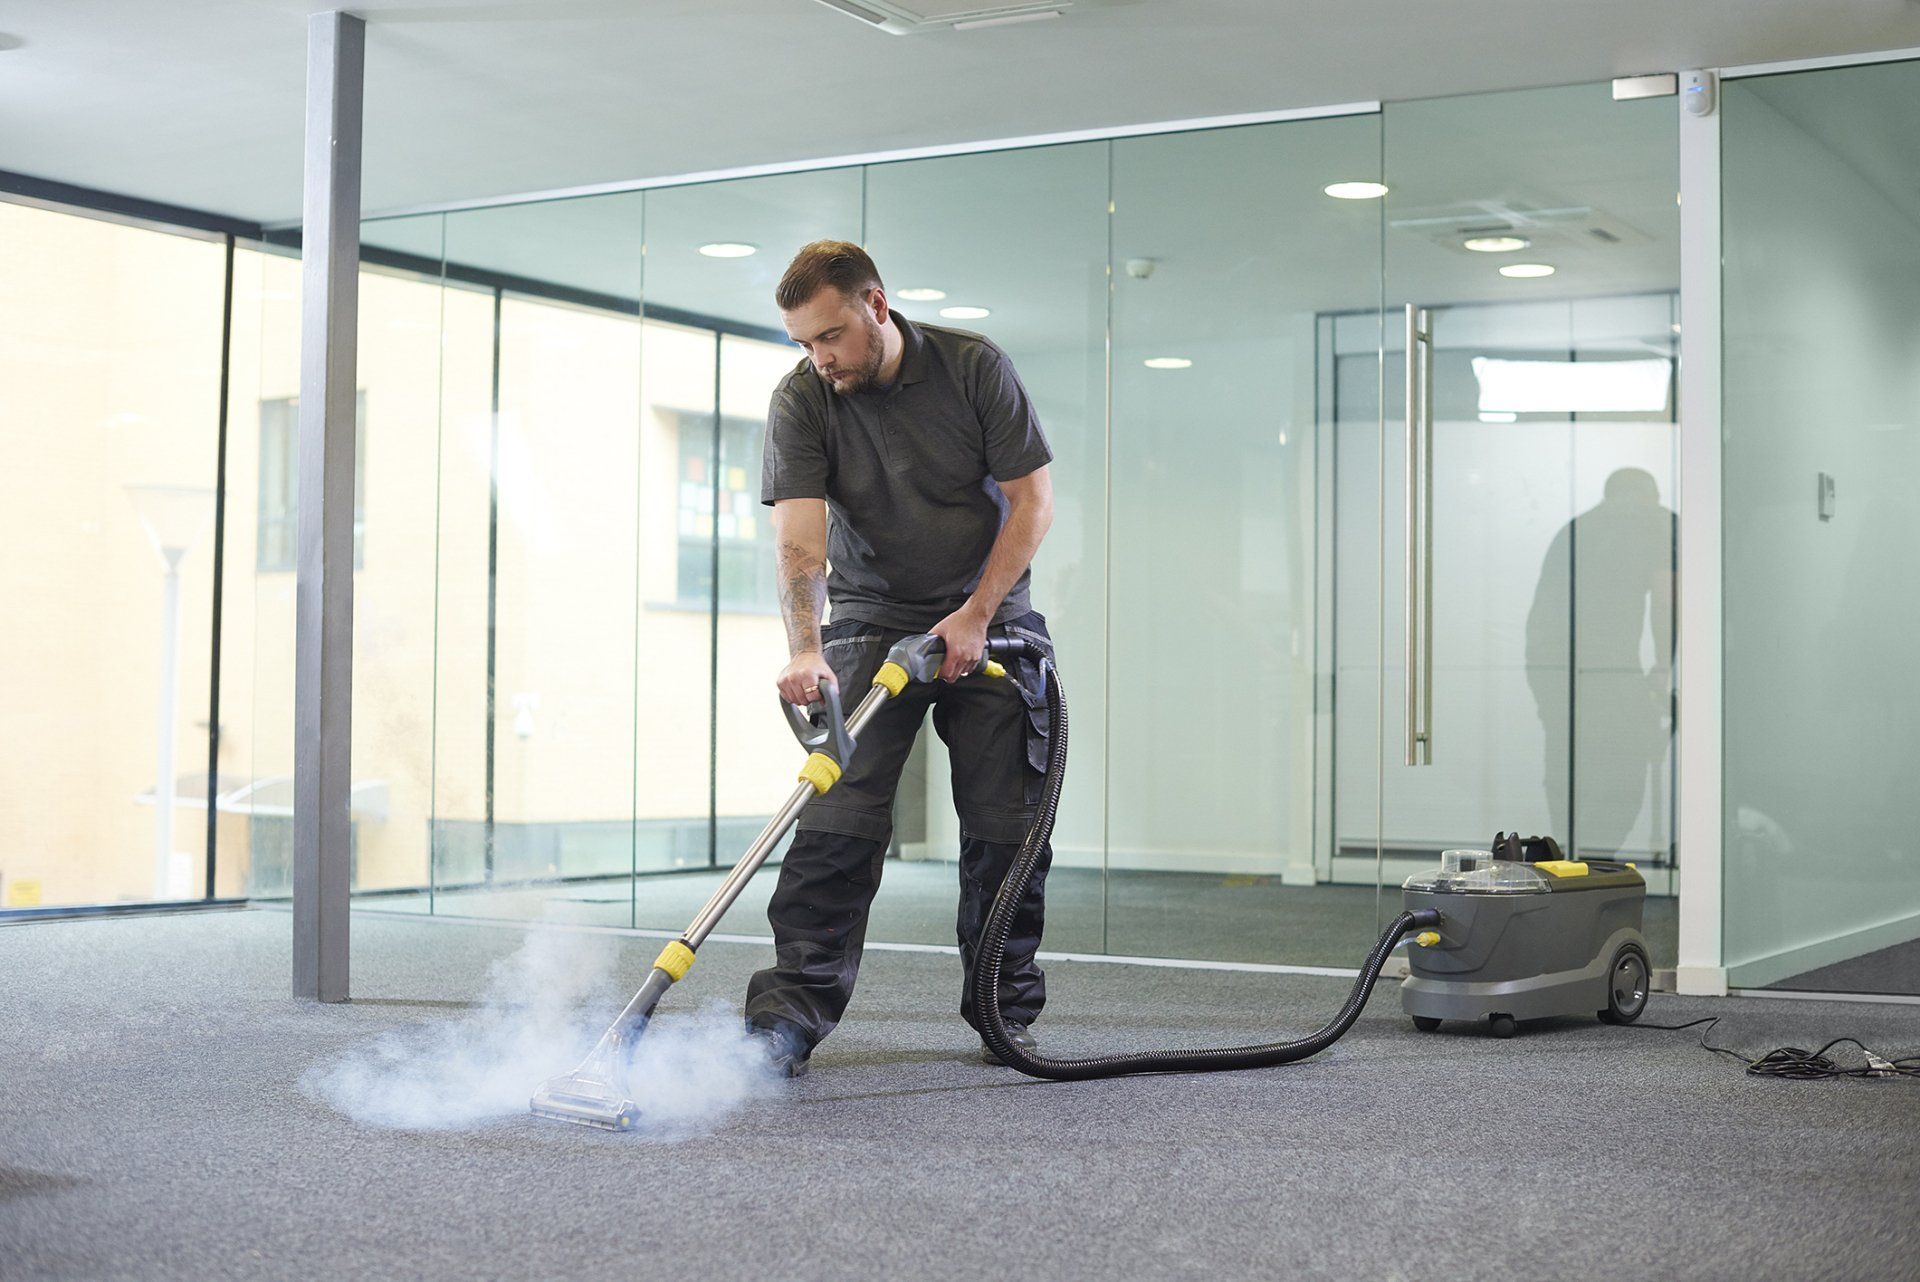 Steam Cleaning the Office Carpet – Fargo, ND - Automated Maintenance Services, Inc.